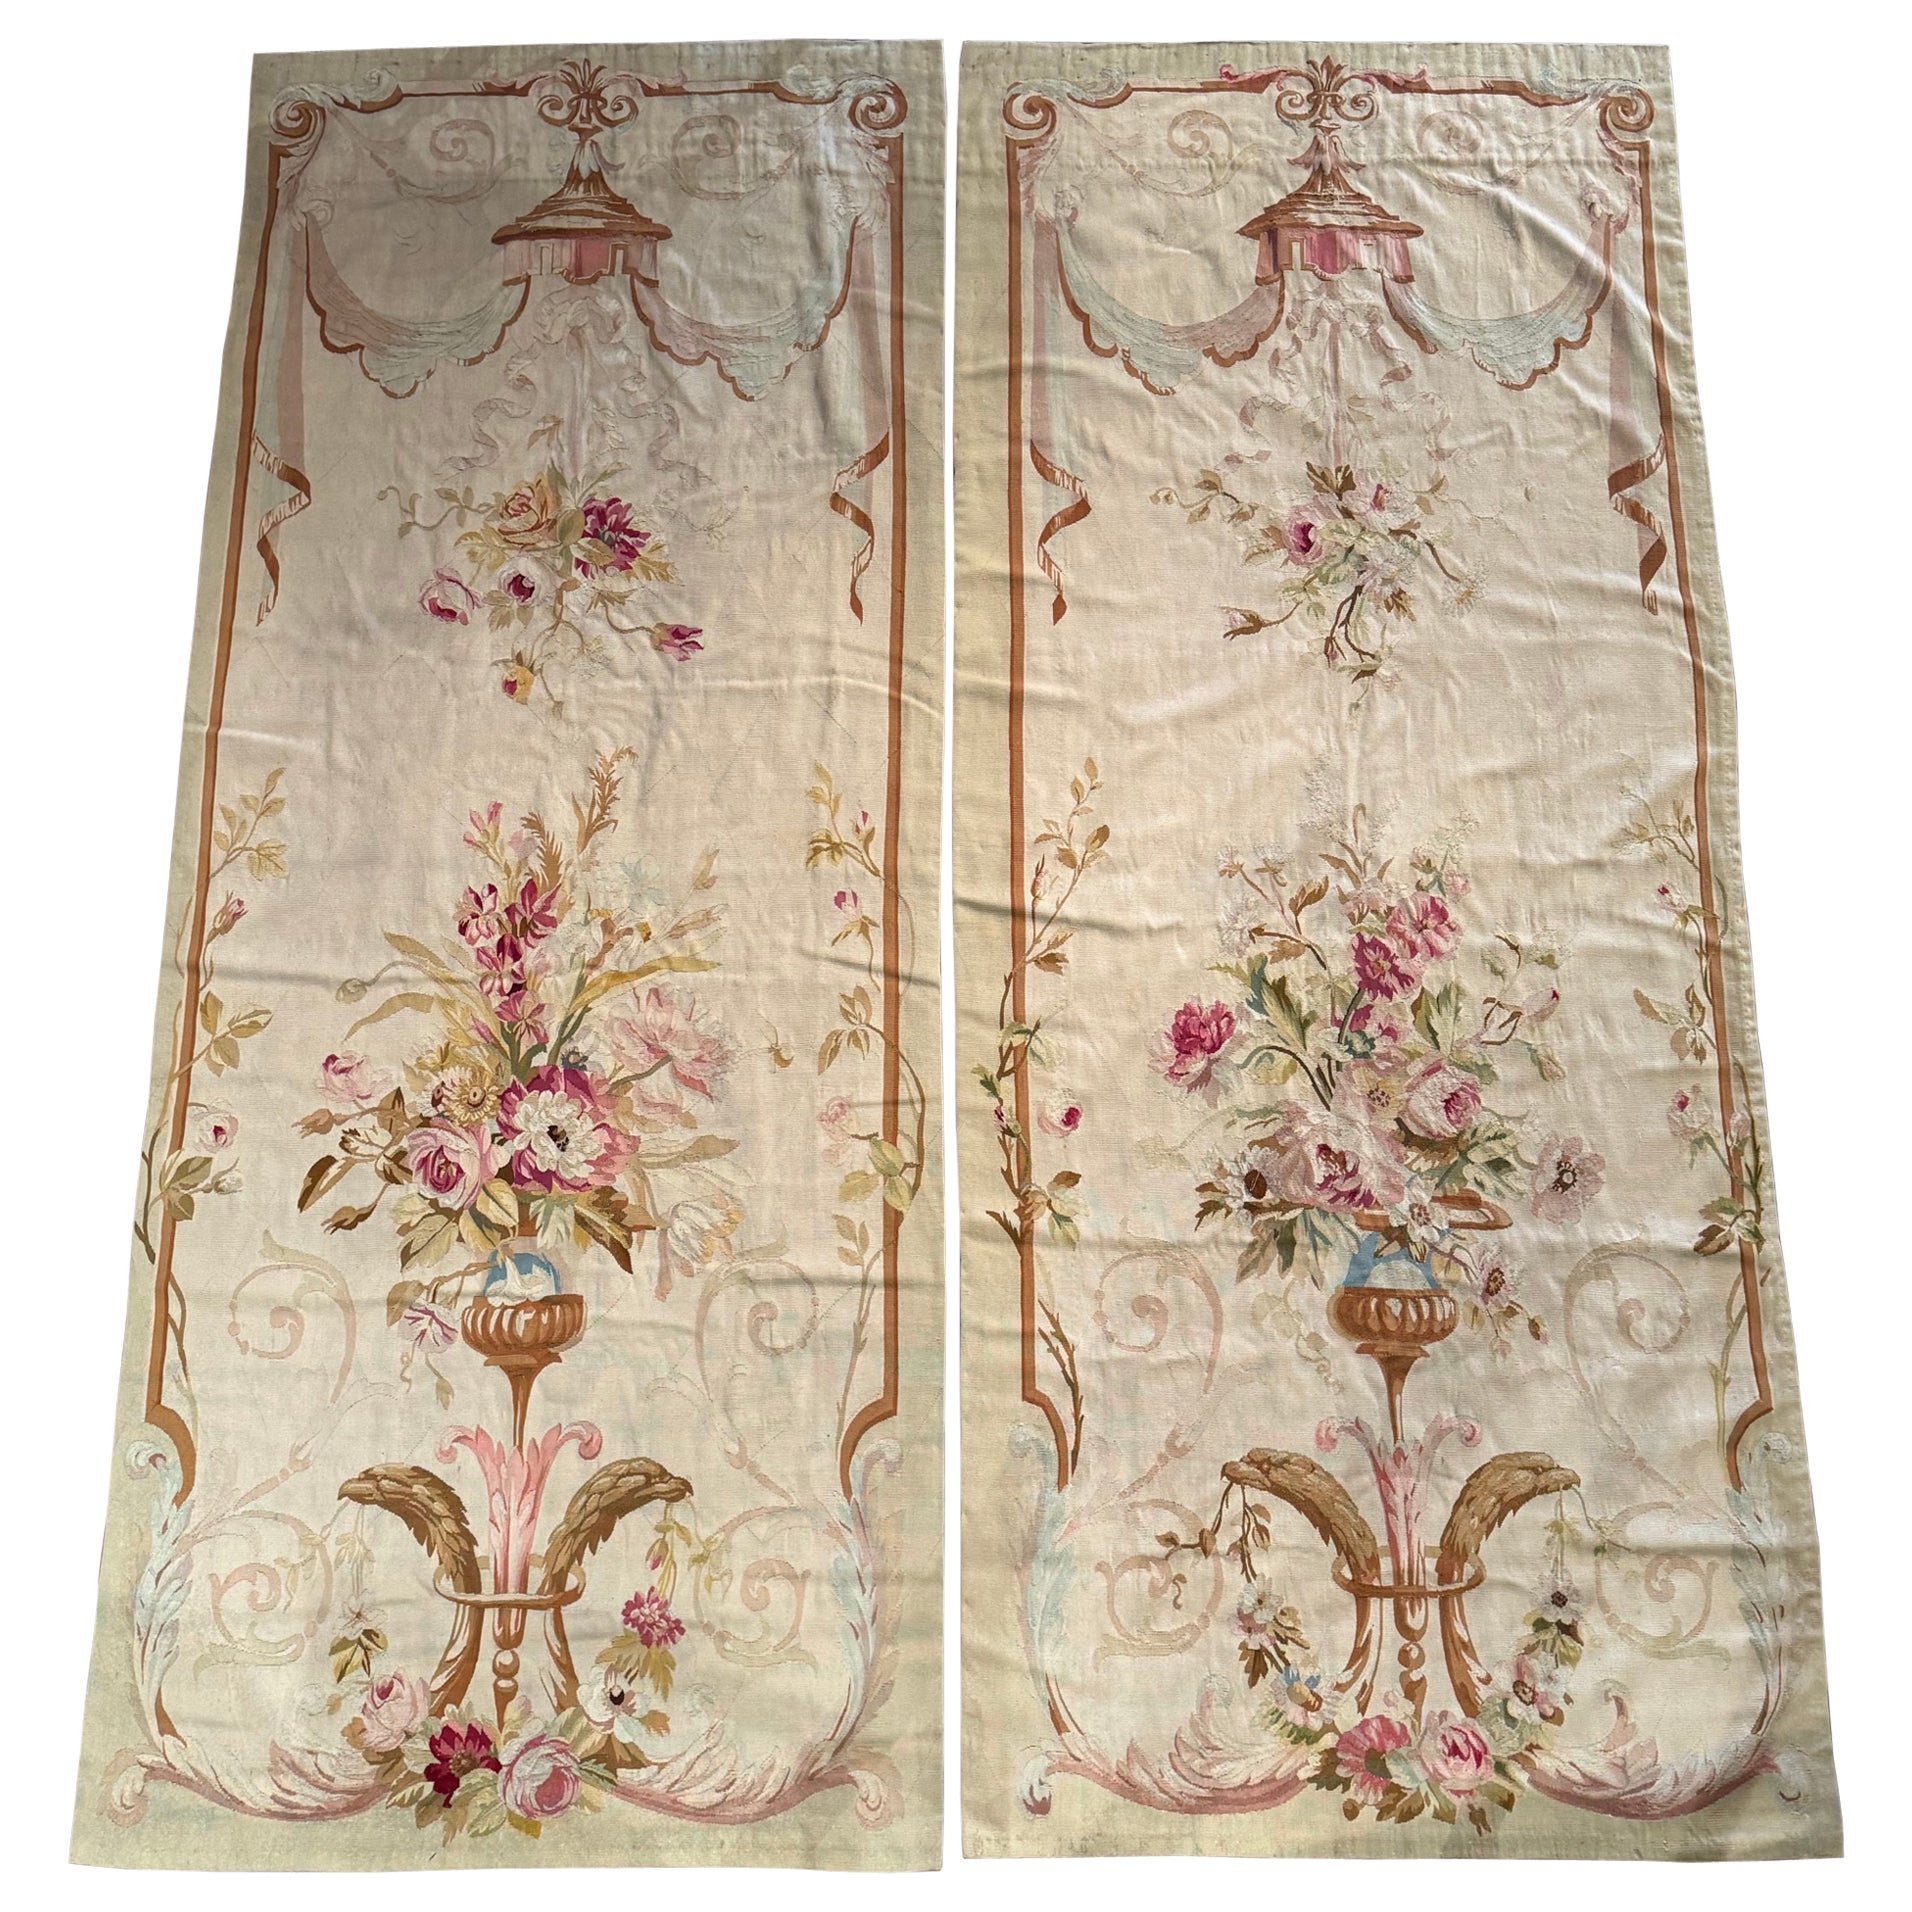 What is Aubusson style?